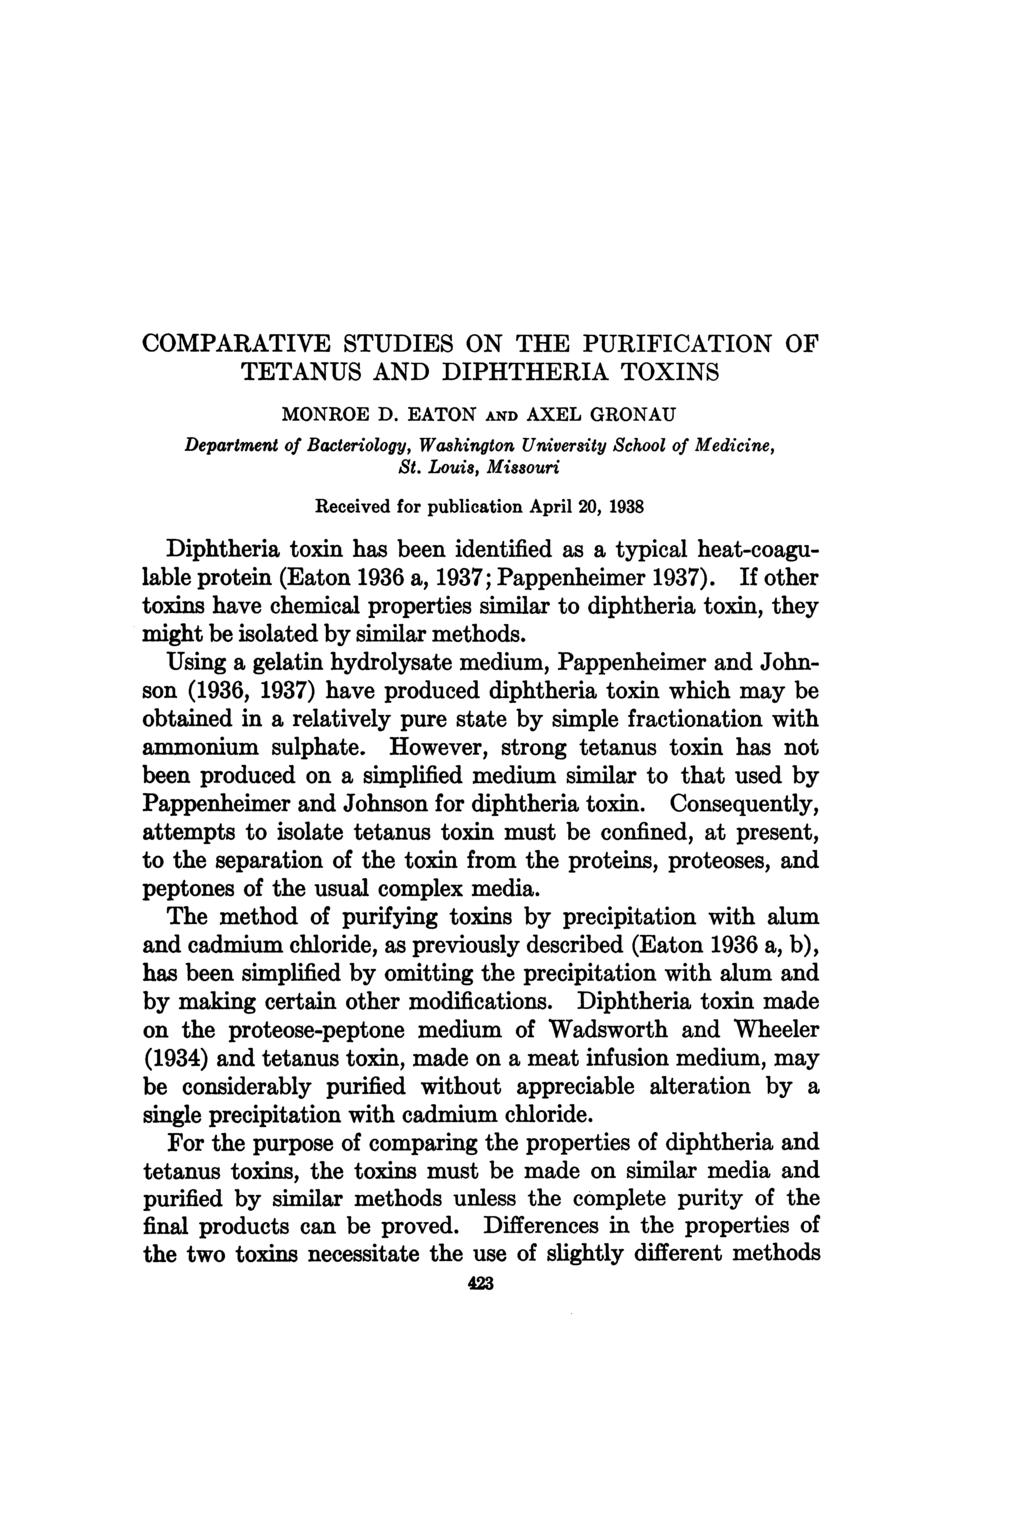 COMPARATIVE STUDIES ON THE PURIFICATION OF TETANUS AND DIPHTHERIA TOXINS MONROE D. EATON AND AXEL GRONAU Department of Bacteriology, Washington University School of Medicine, St.